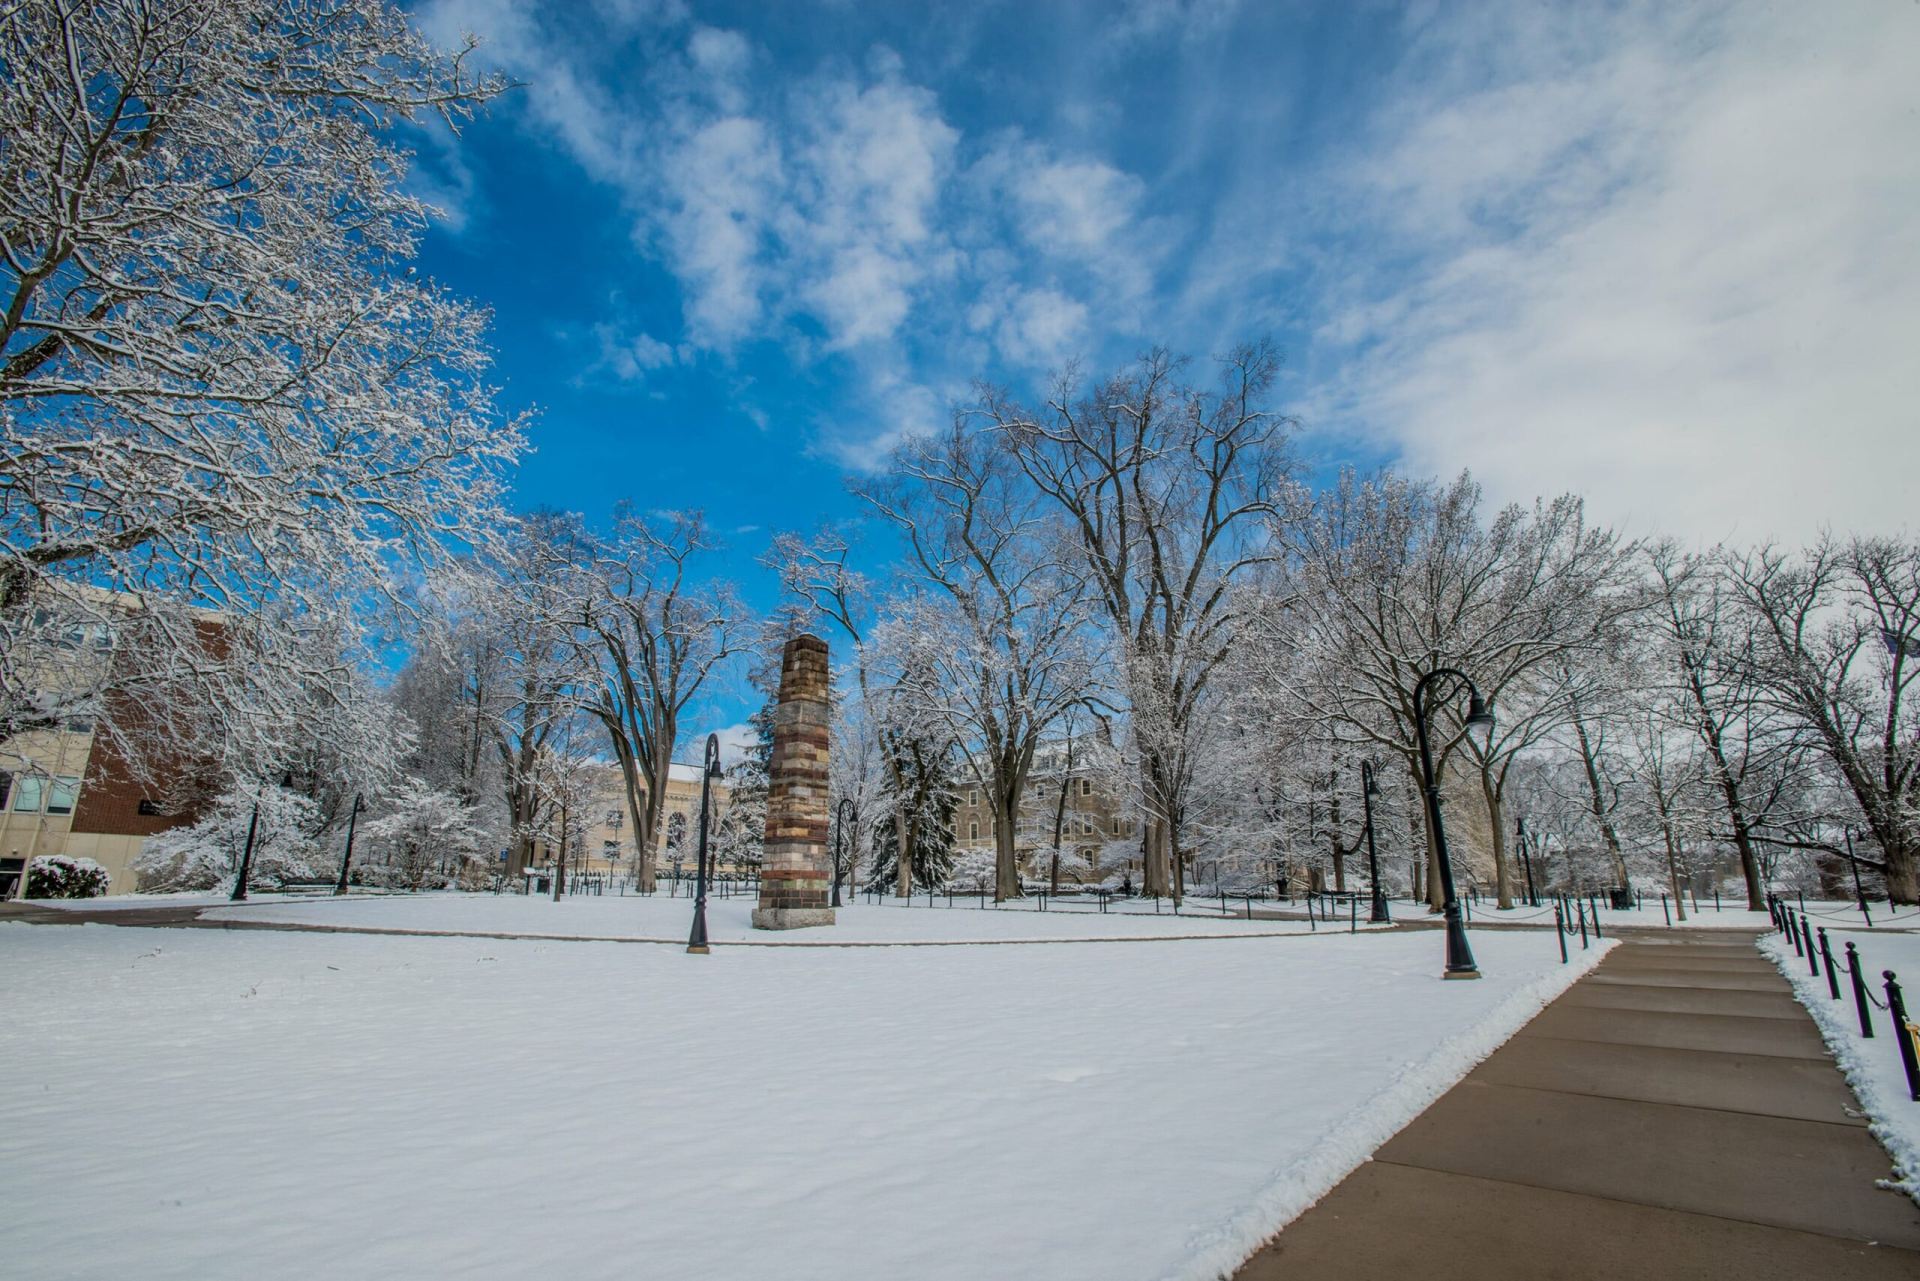 Campussnow2017 49 Scaled 1 600x400 2